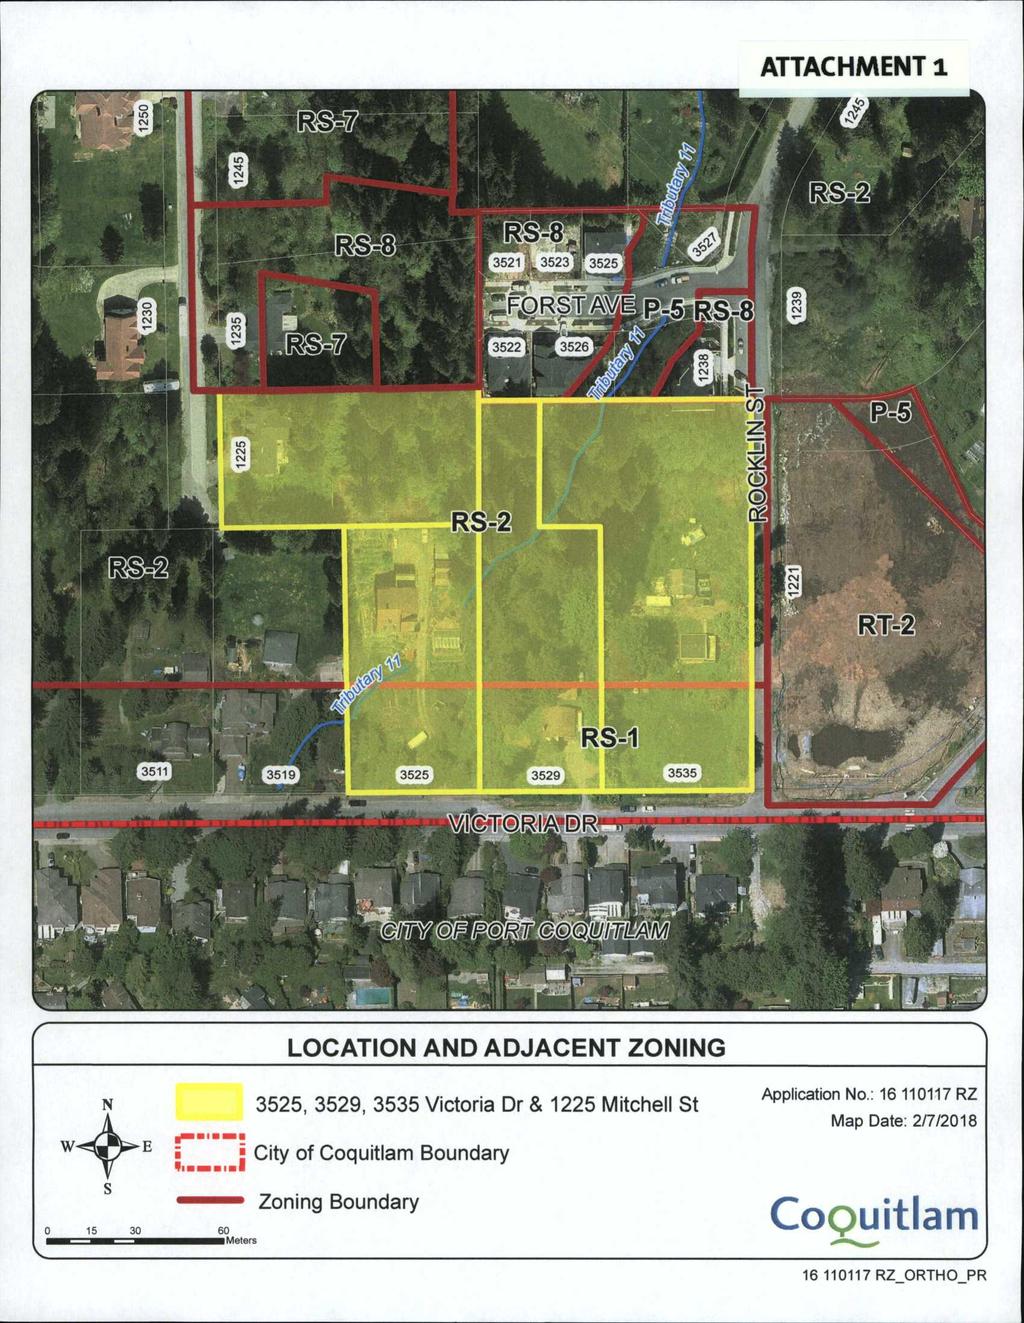 ATTACHMENT 1 LOCATION AND ADJACENT ZONING N s 15 30 60 Meters 3525, 3529, 3535 Victoria Dr & 1225 Mitchell St City